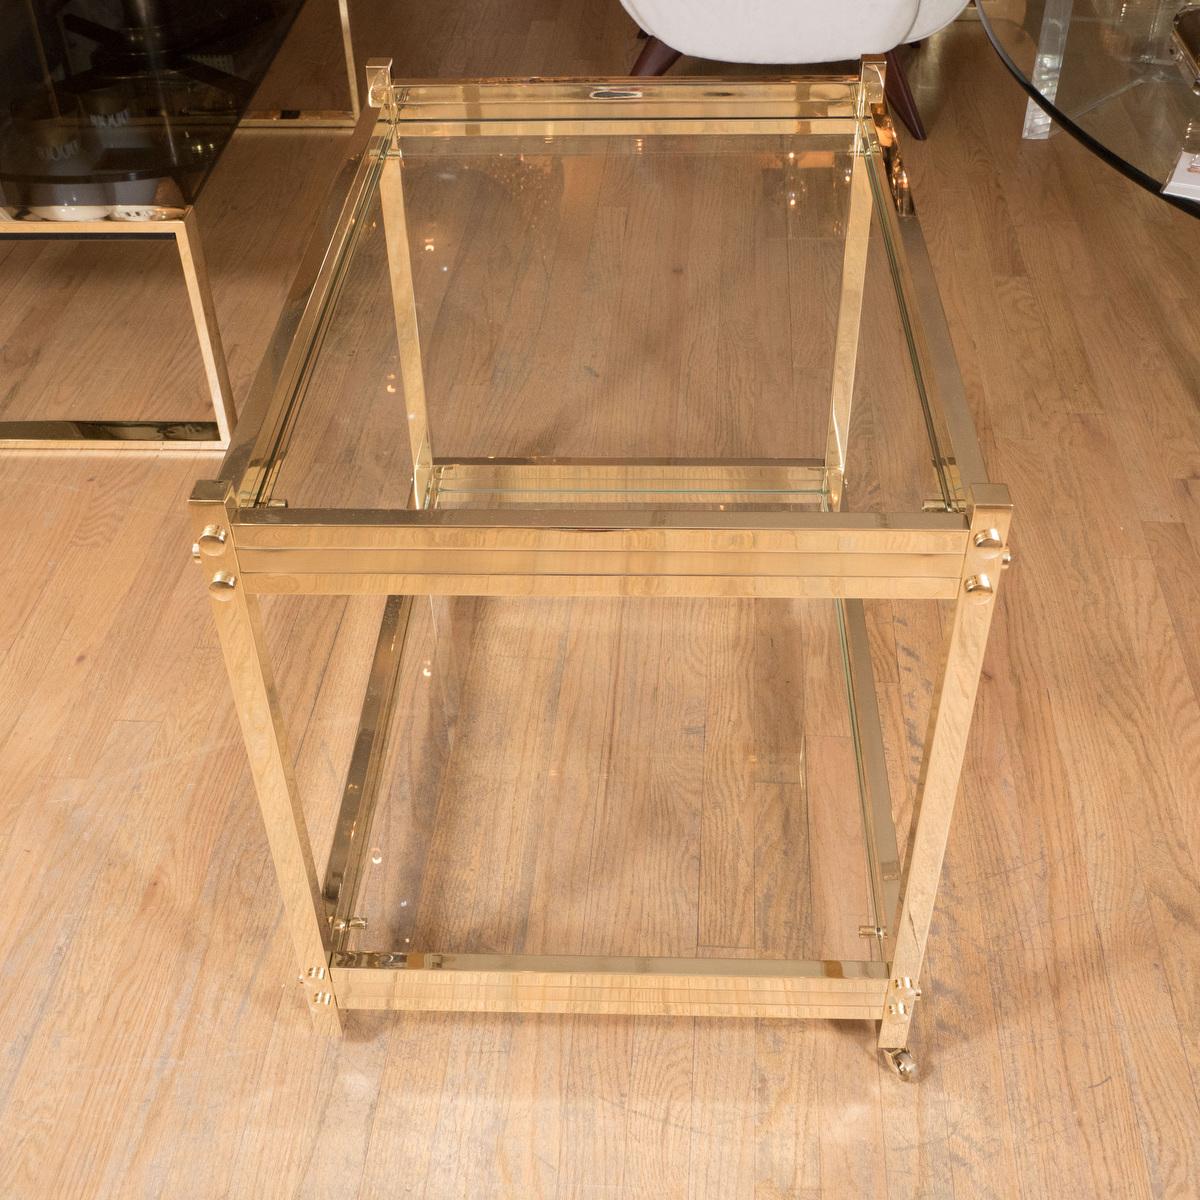 Two tier brass and glass rolling bar cart.